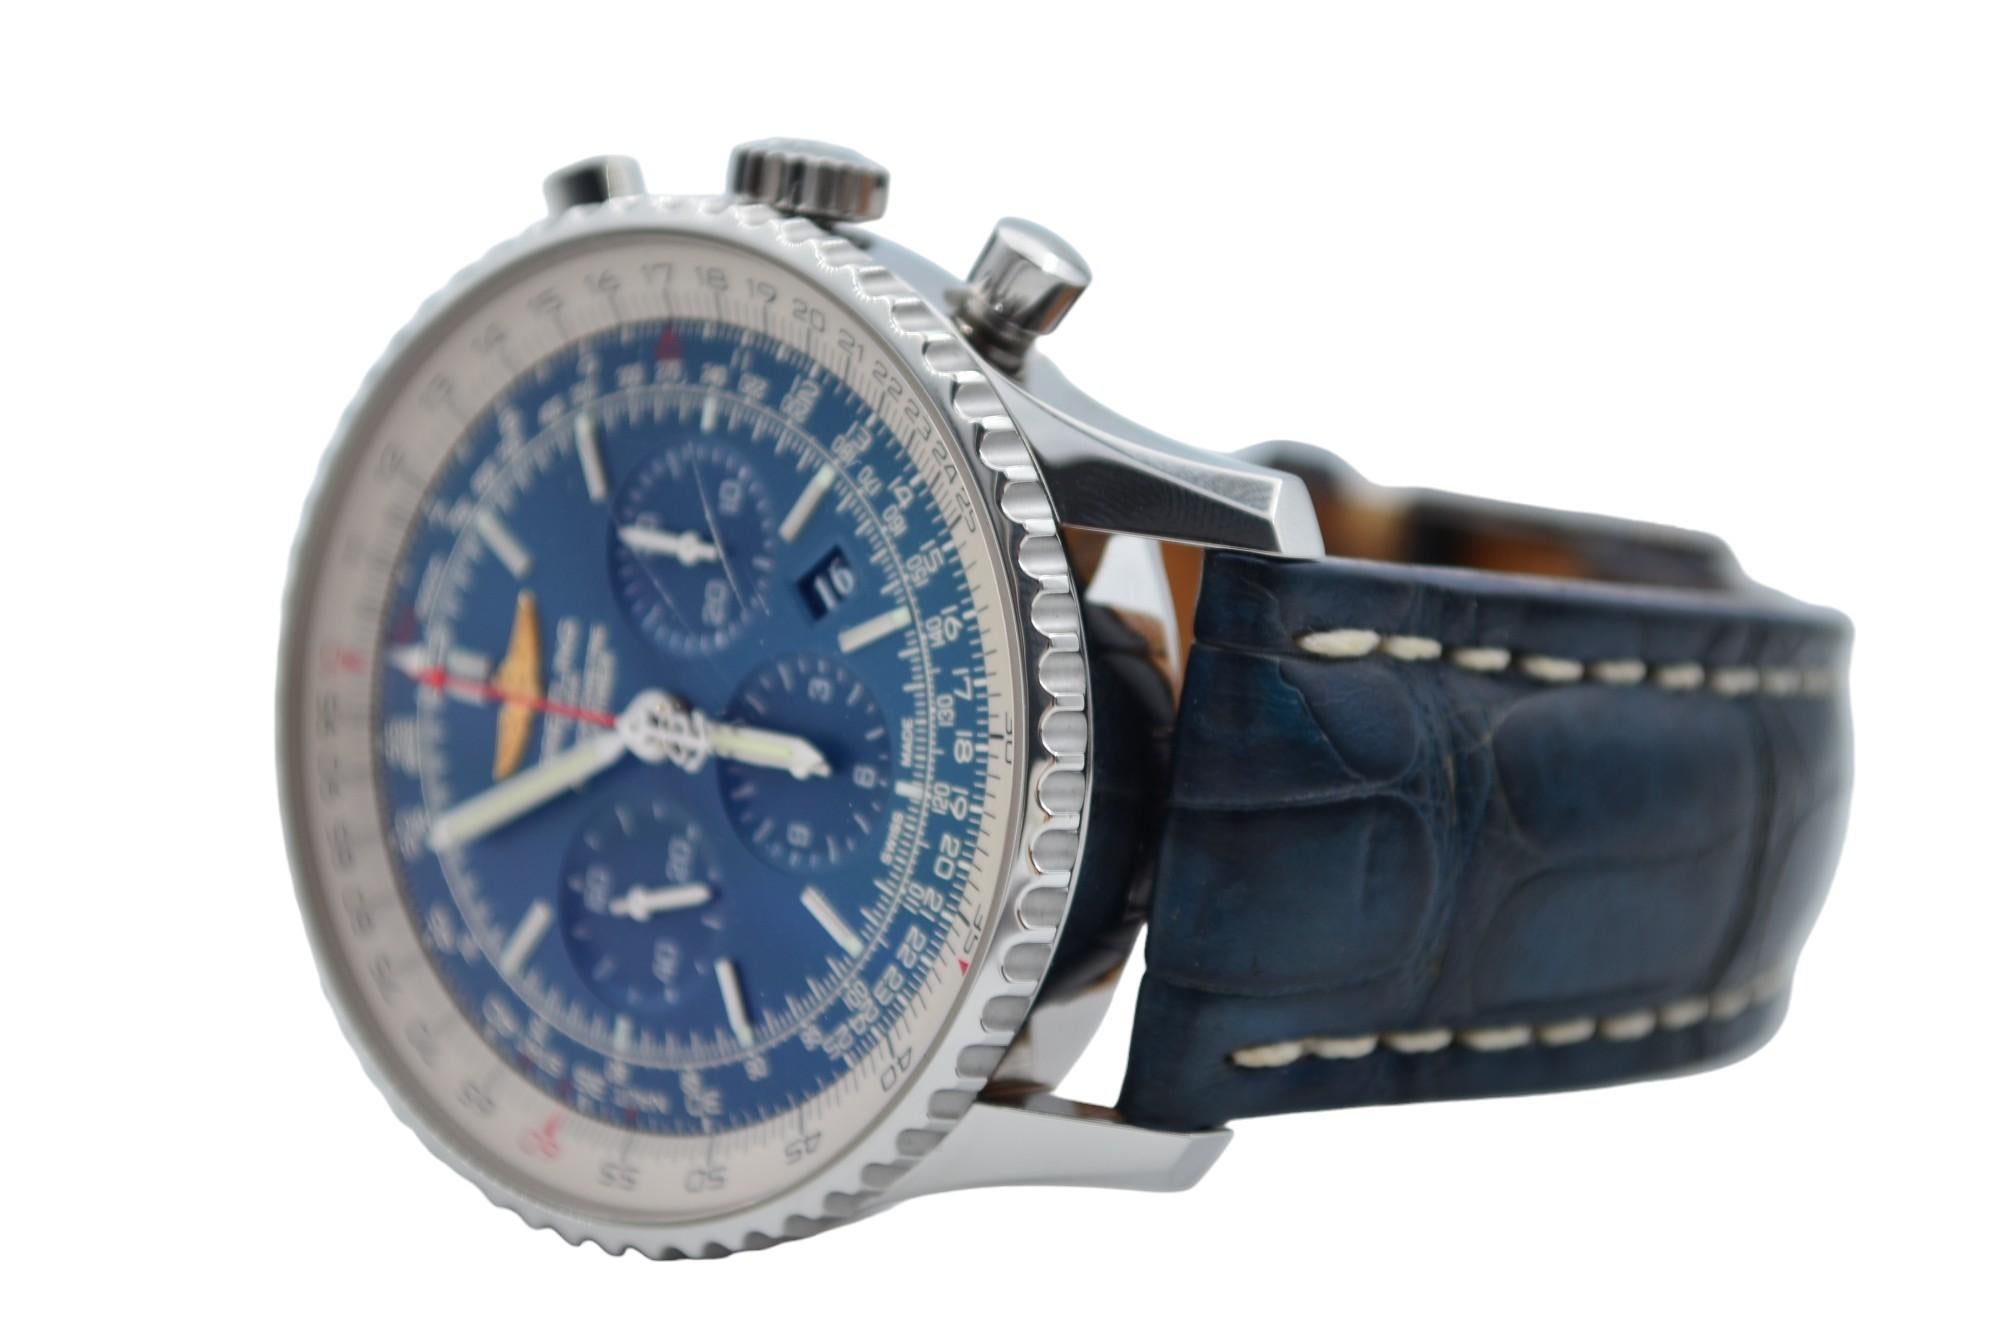 Breitling Navitimer 1 Chronograph 46mm Steel Blue Dial Leather Strap AB012721 For Sale 2